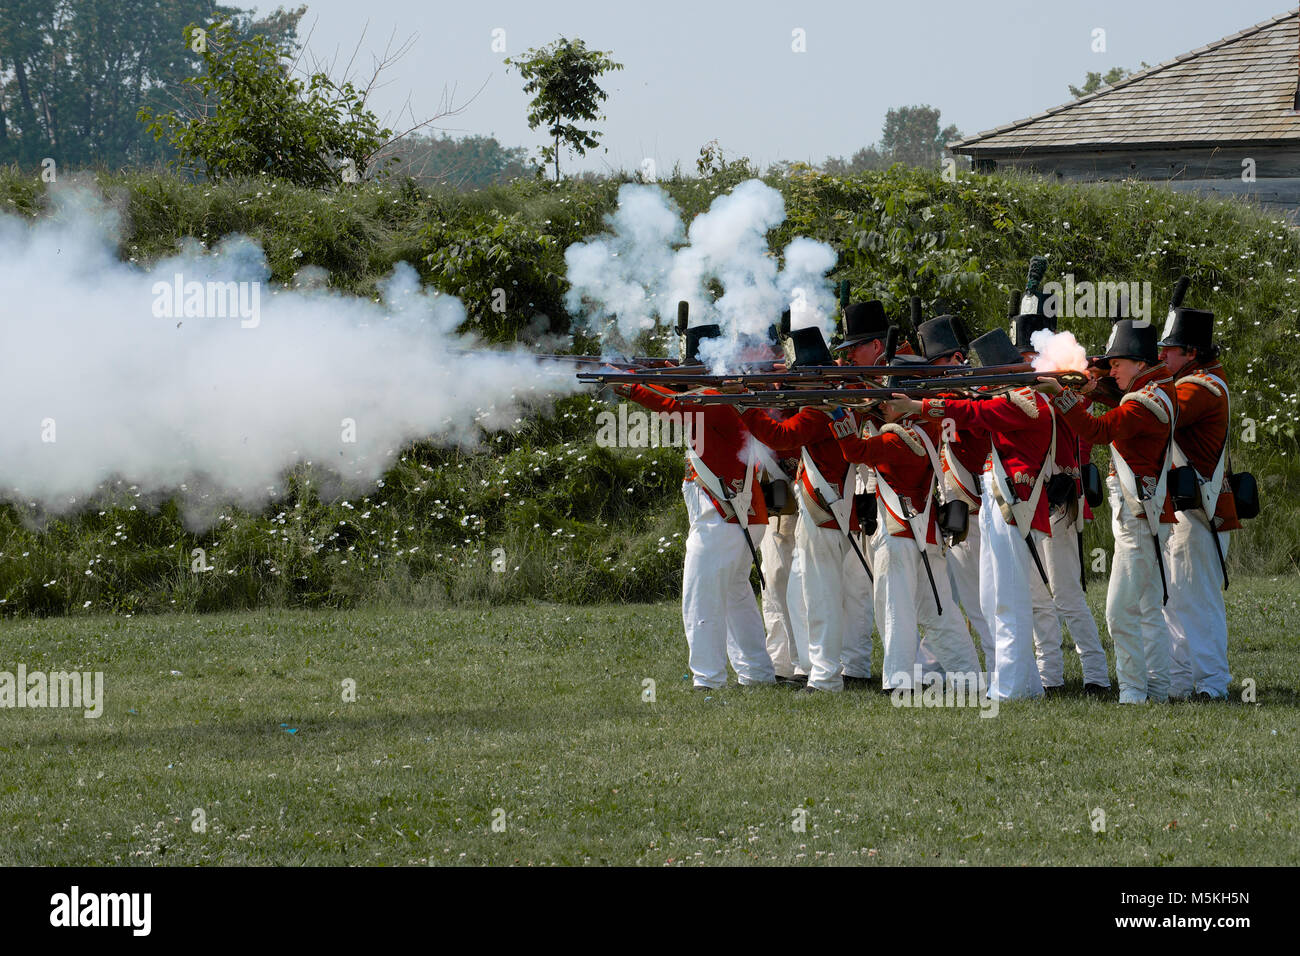 A musket firing demonstration at the Fort George Historic Site, Niagara-on-the-Lake, Ontario, Canada Stock Photo